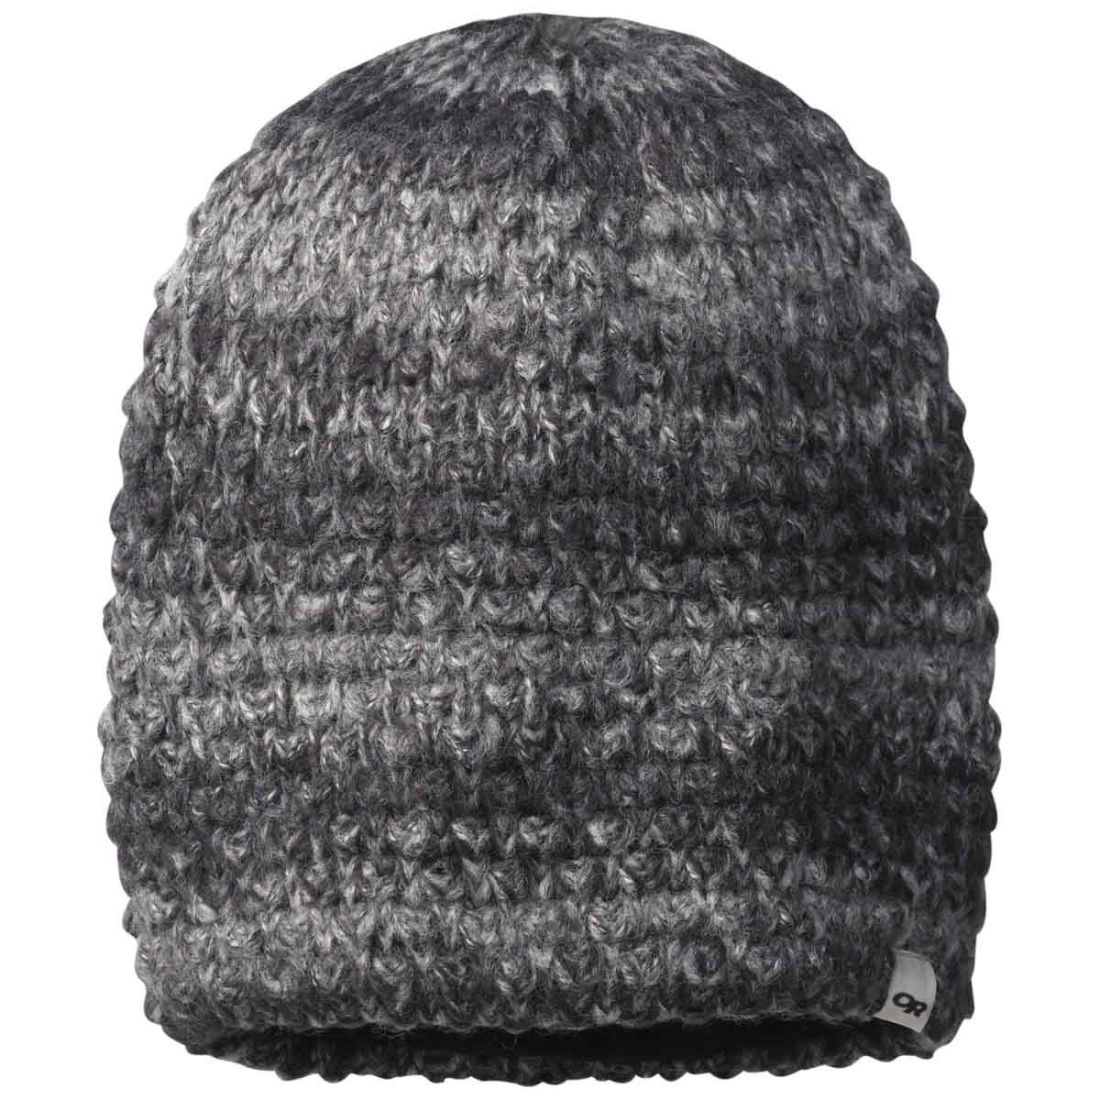 Outdoor research - Теплая шапка Picchu Beanie